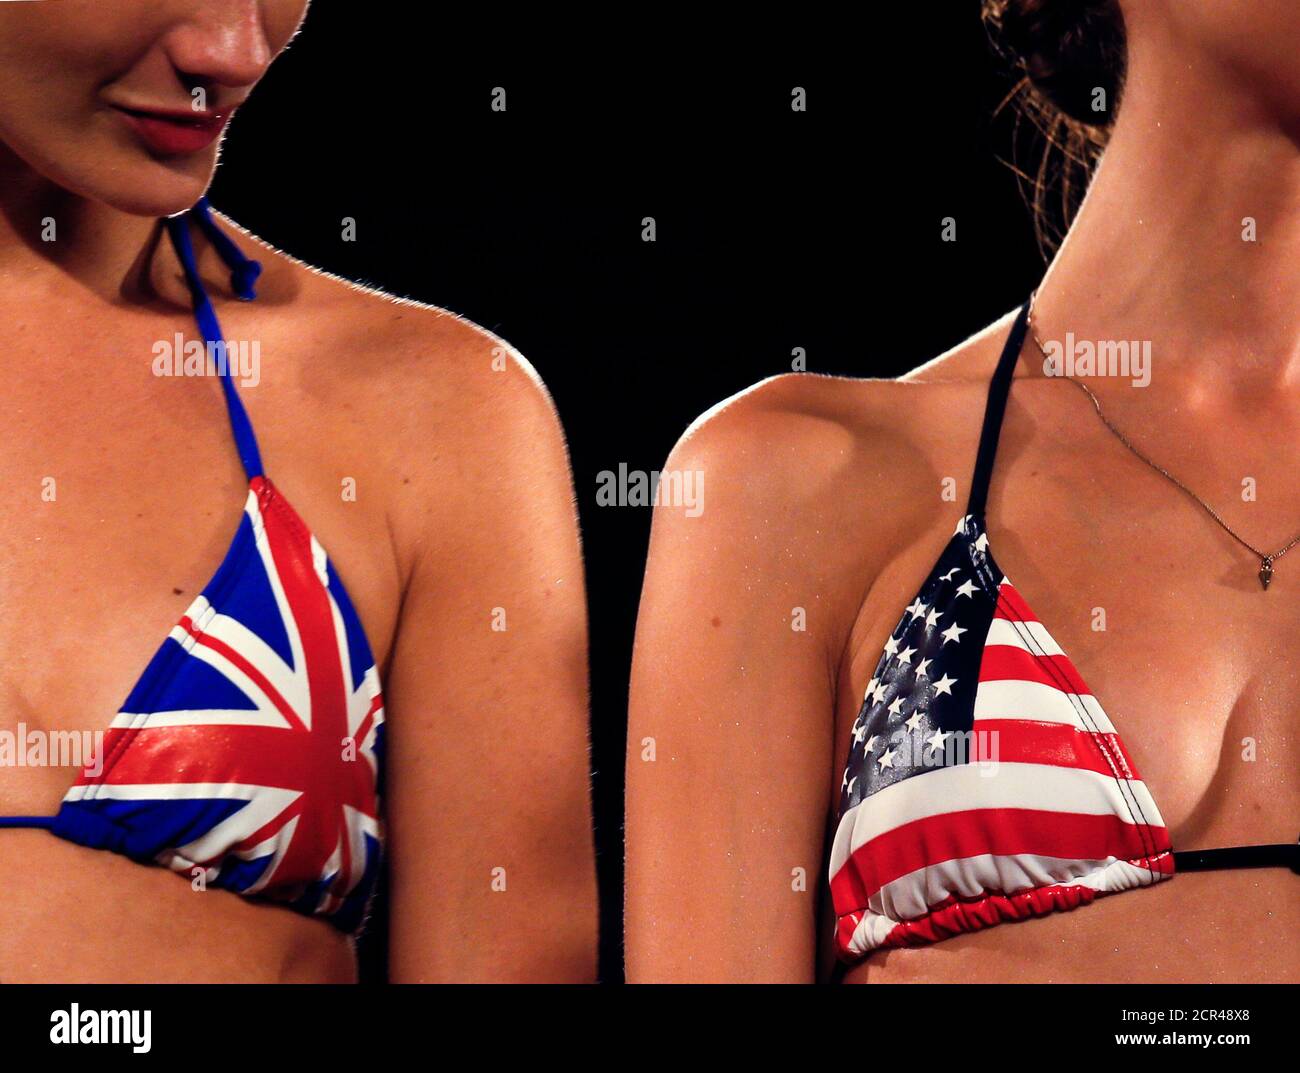 Bikini girls stand in the boxing ring during the Hedge Fund Fight Nite  white collar charity boxing event in Hong Kong October 25, 2012.  REUTERS/Bobby Yip (CHINA - Tags: SPORT BOXING BUSINESS